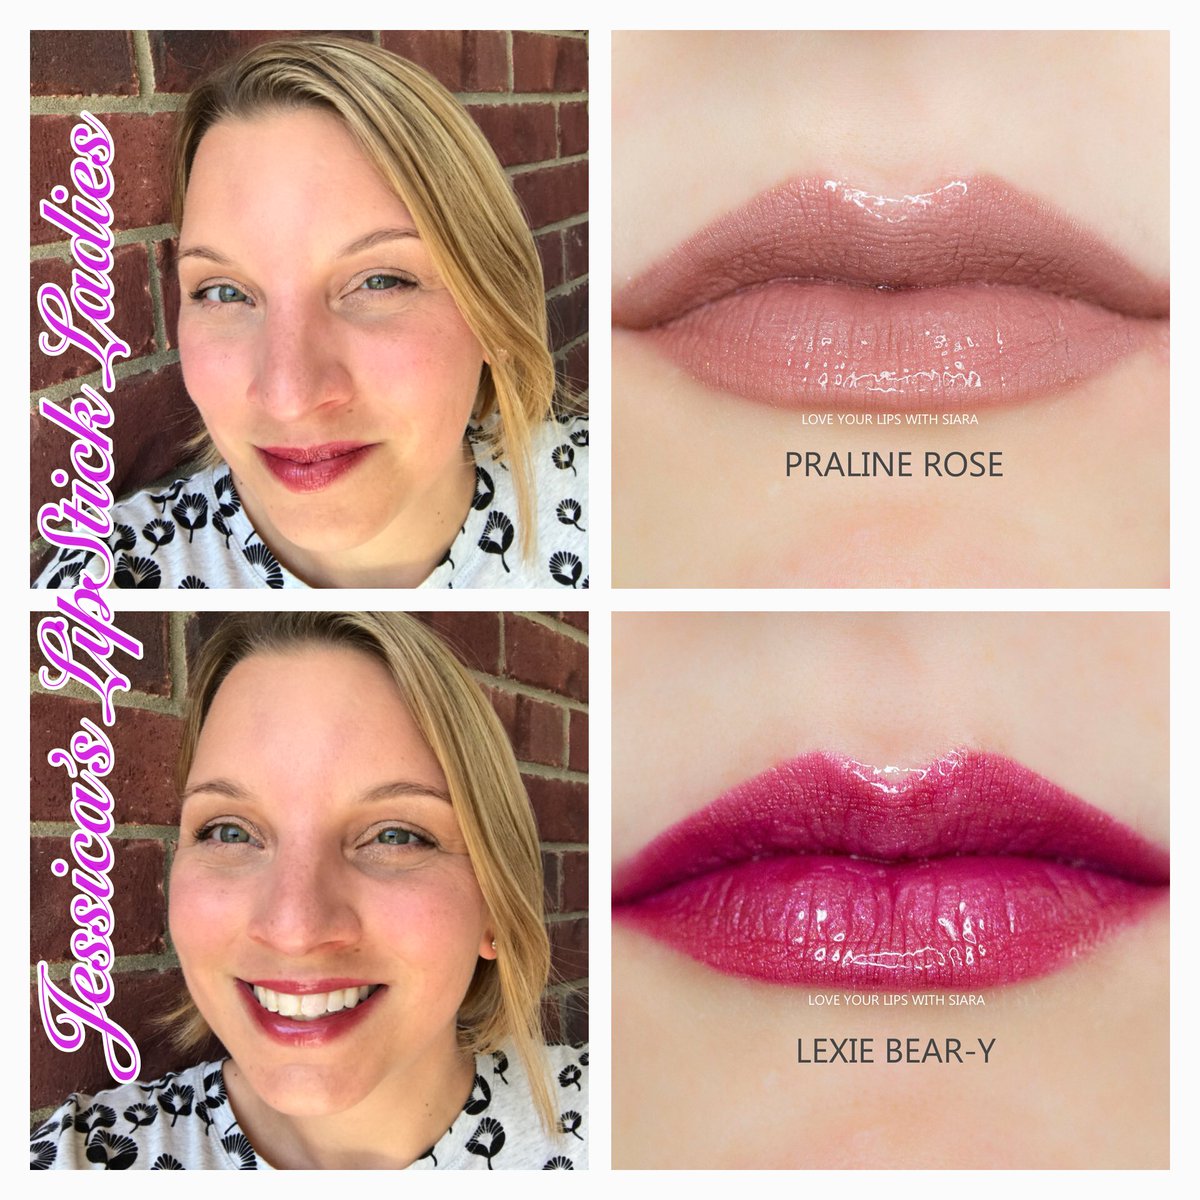 Layer! Love the purple in Lexie bear-y but wanted it toned down a bit today and my water line not as obvious 1. Praline Rose 2.lexie bear-y 3.lexie bear-y #lipsense #layerlipsense #lexiebeary #pralinerose #momglam #boymom #momof3 #jessicaslipstickladies #glutenfreemakeup